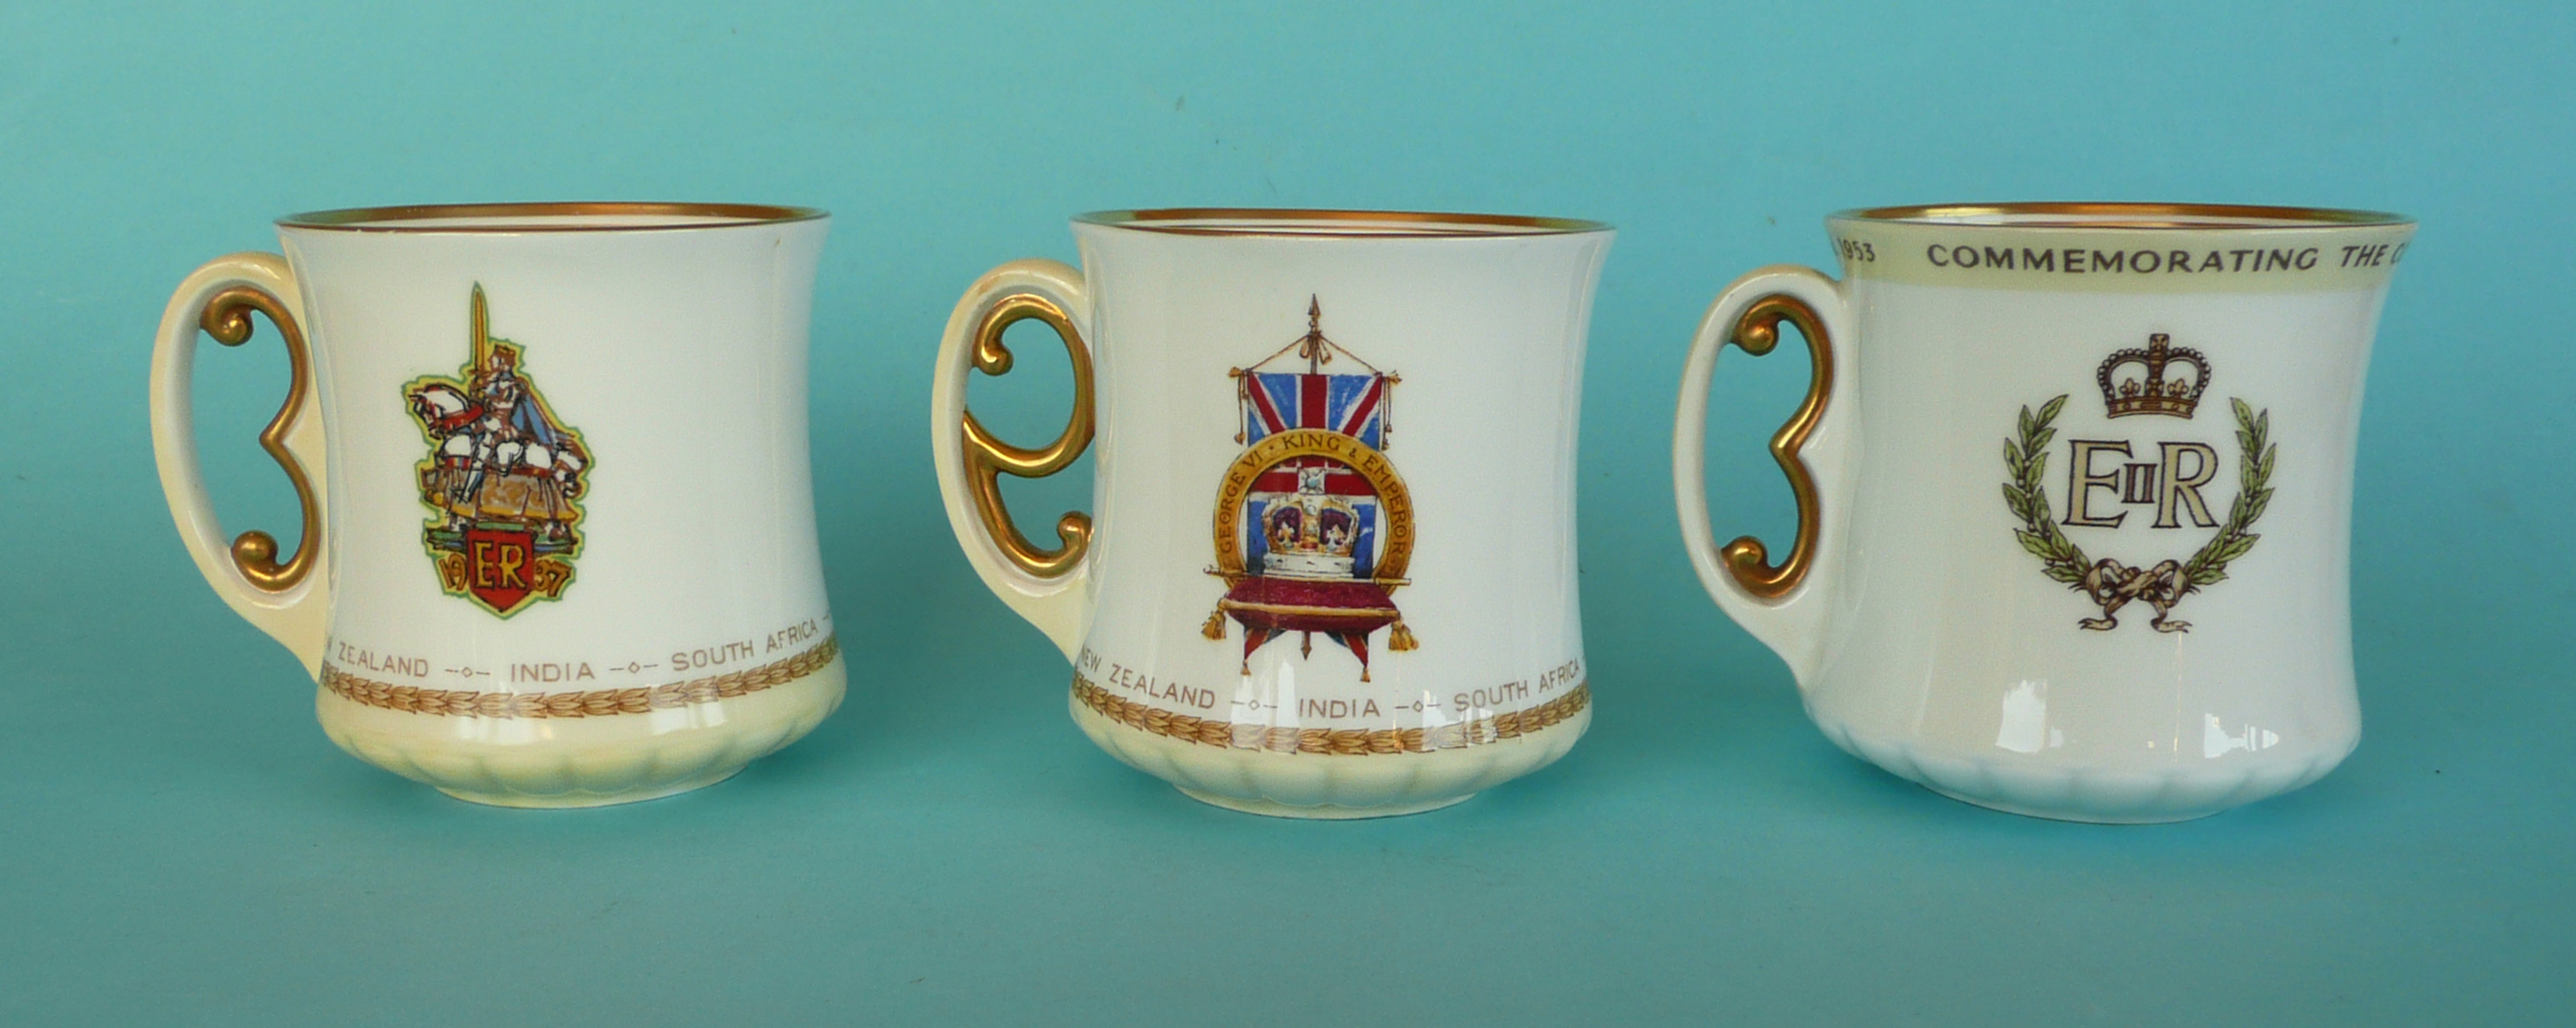 Three Royal Doulton porcelain mugs with initialled handles for Edward VIII, George VI and - Image 2 of 2